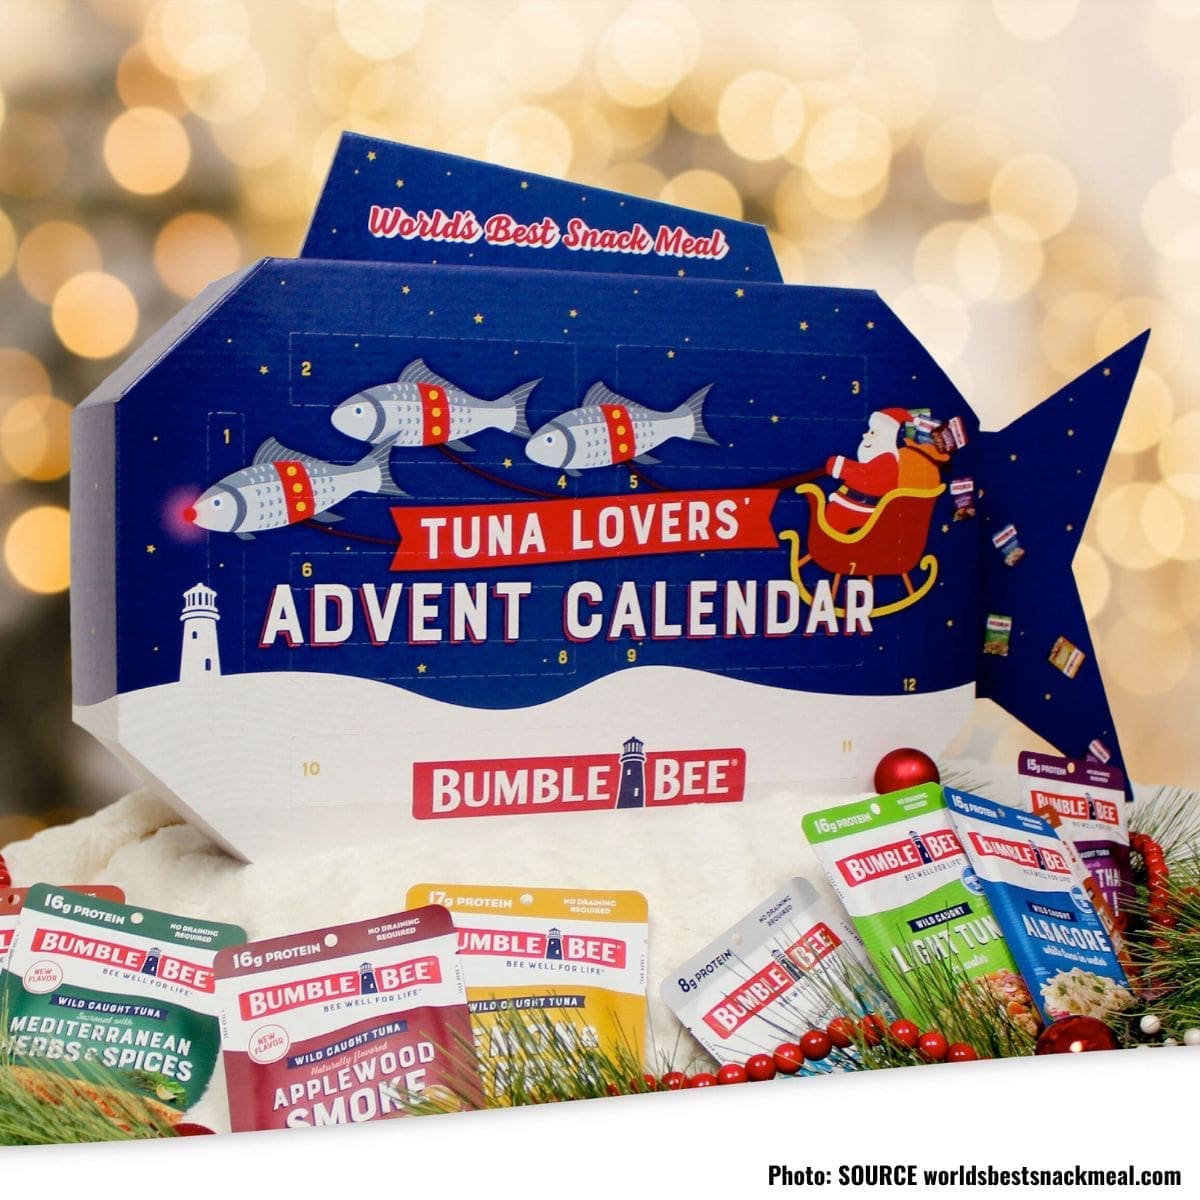 Un-BEE-lievable Bumblebee Tuna Transforms the Holiday Countdown with Advent Calendars